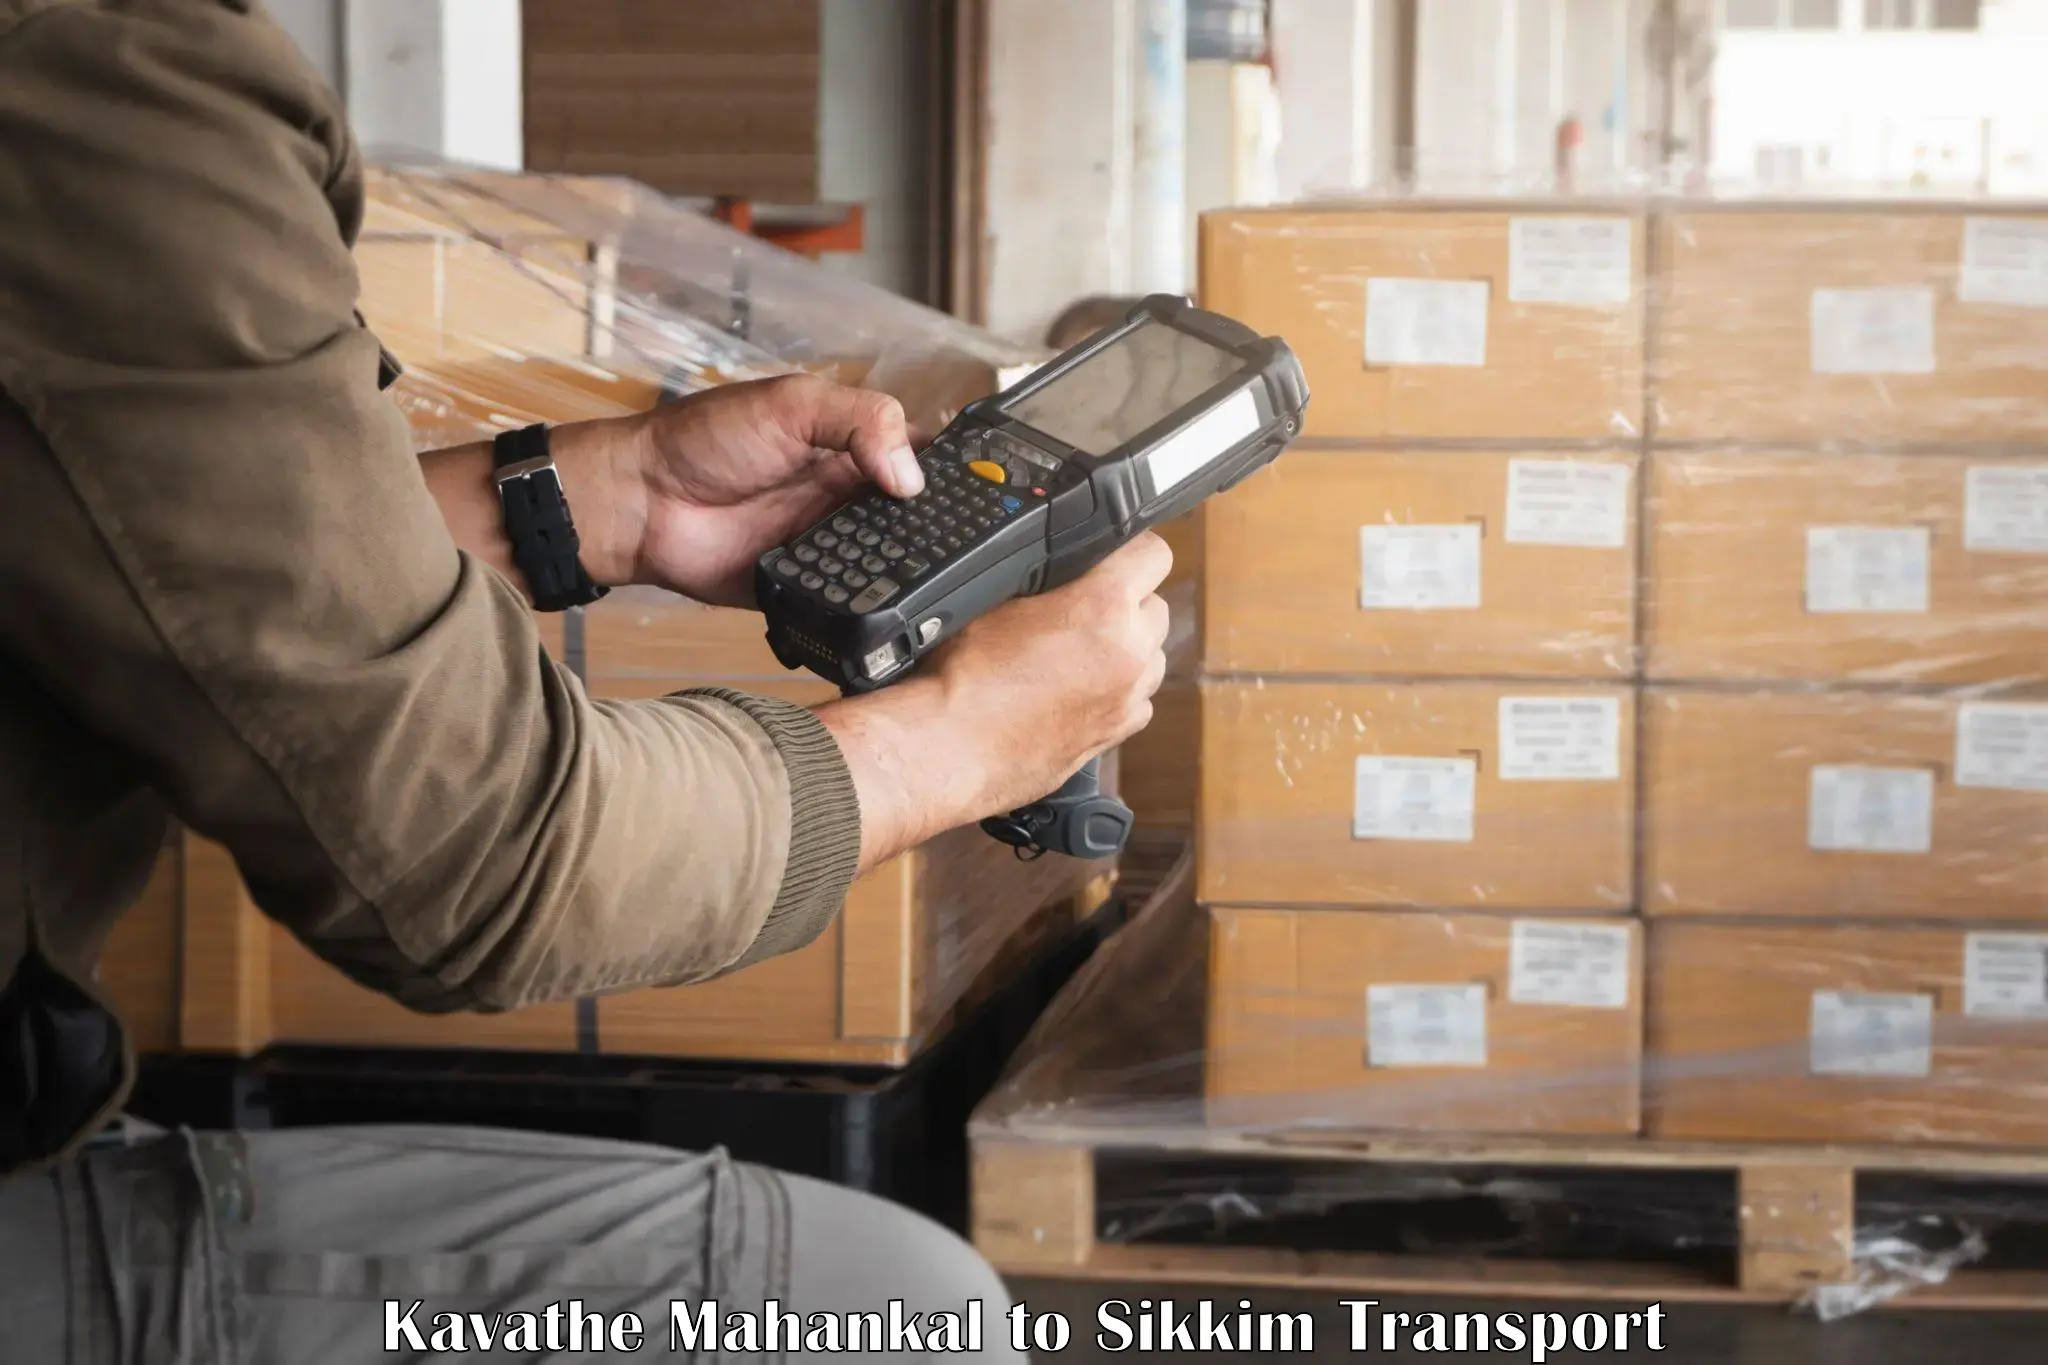 Delivery service Kavathe Mahankal to West Sikkim